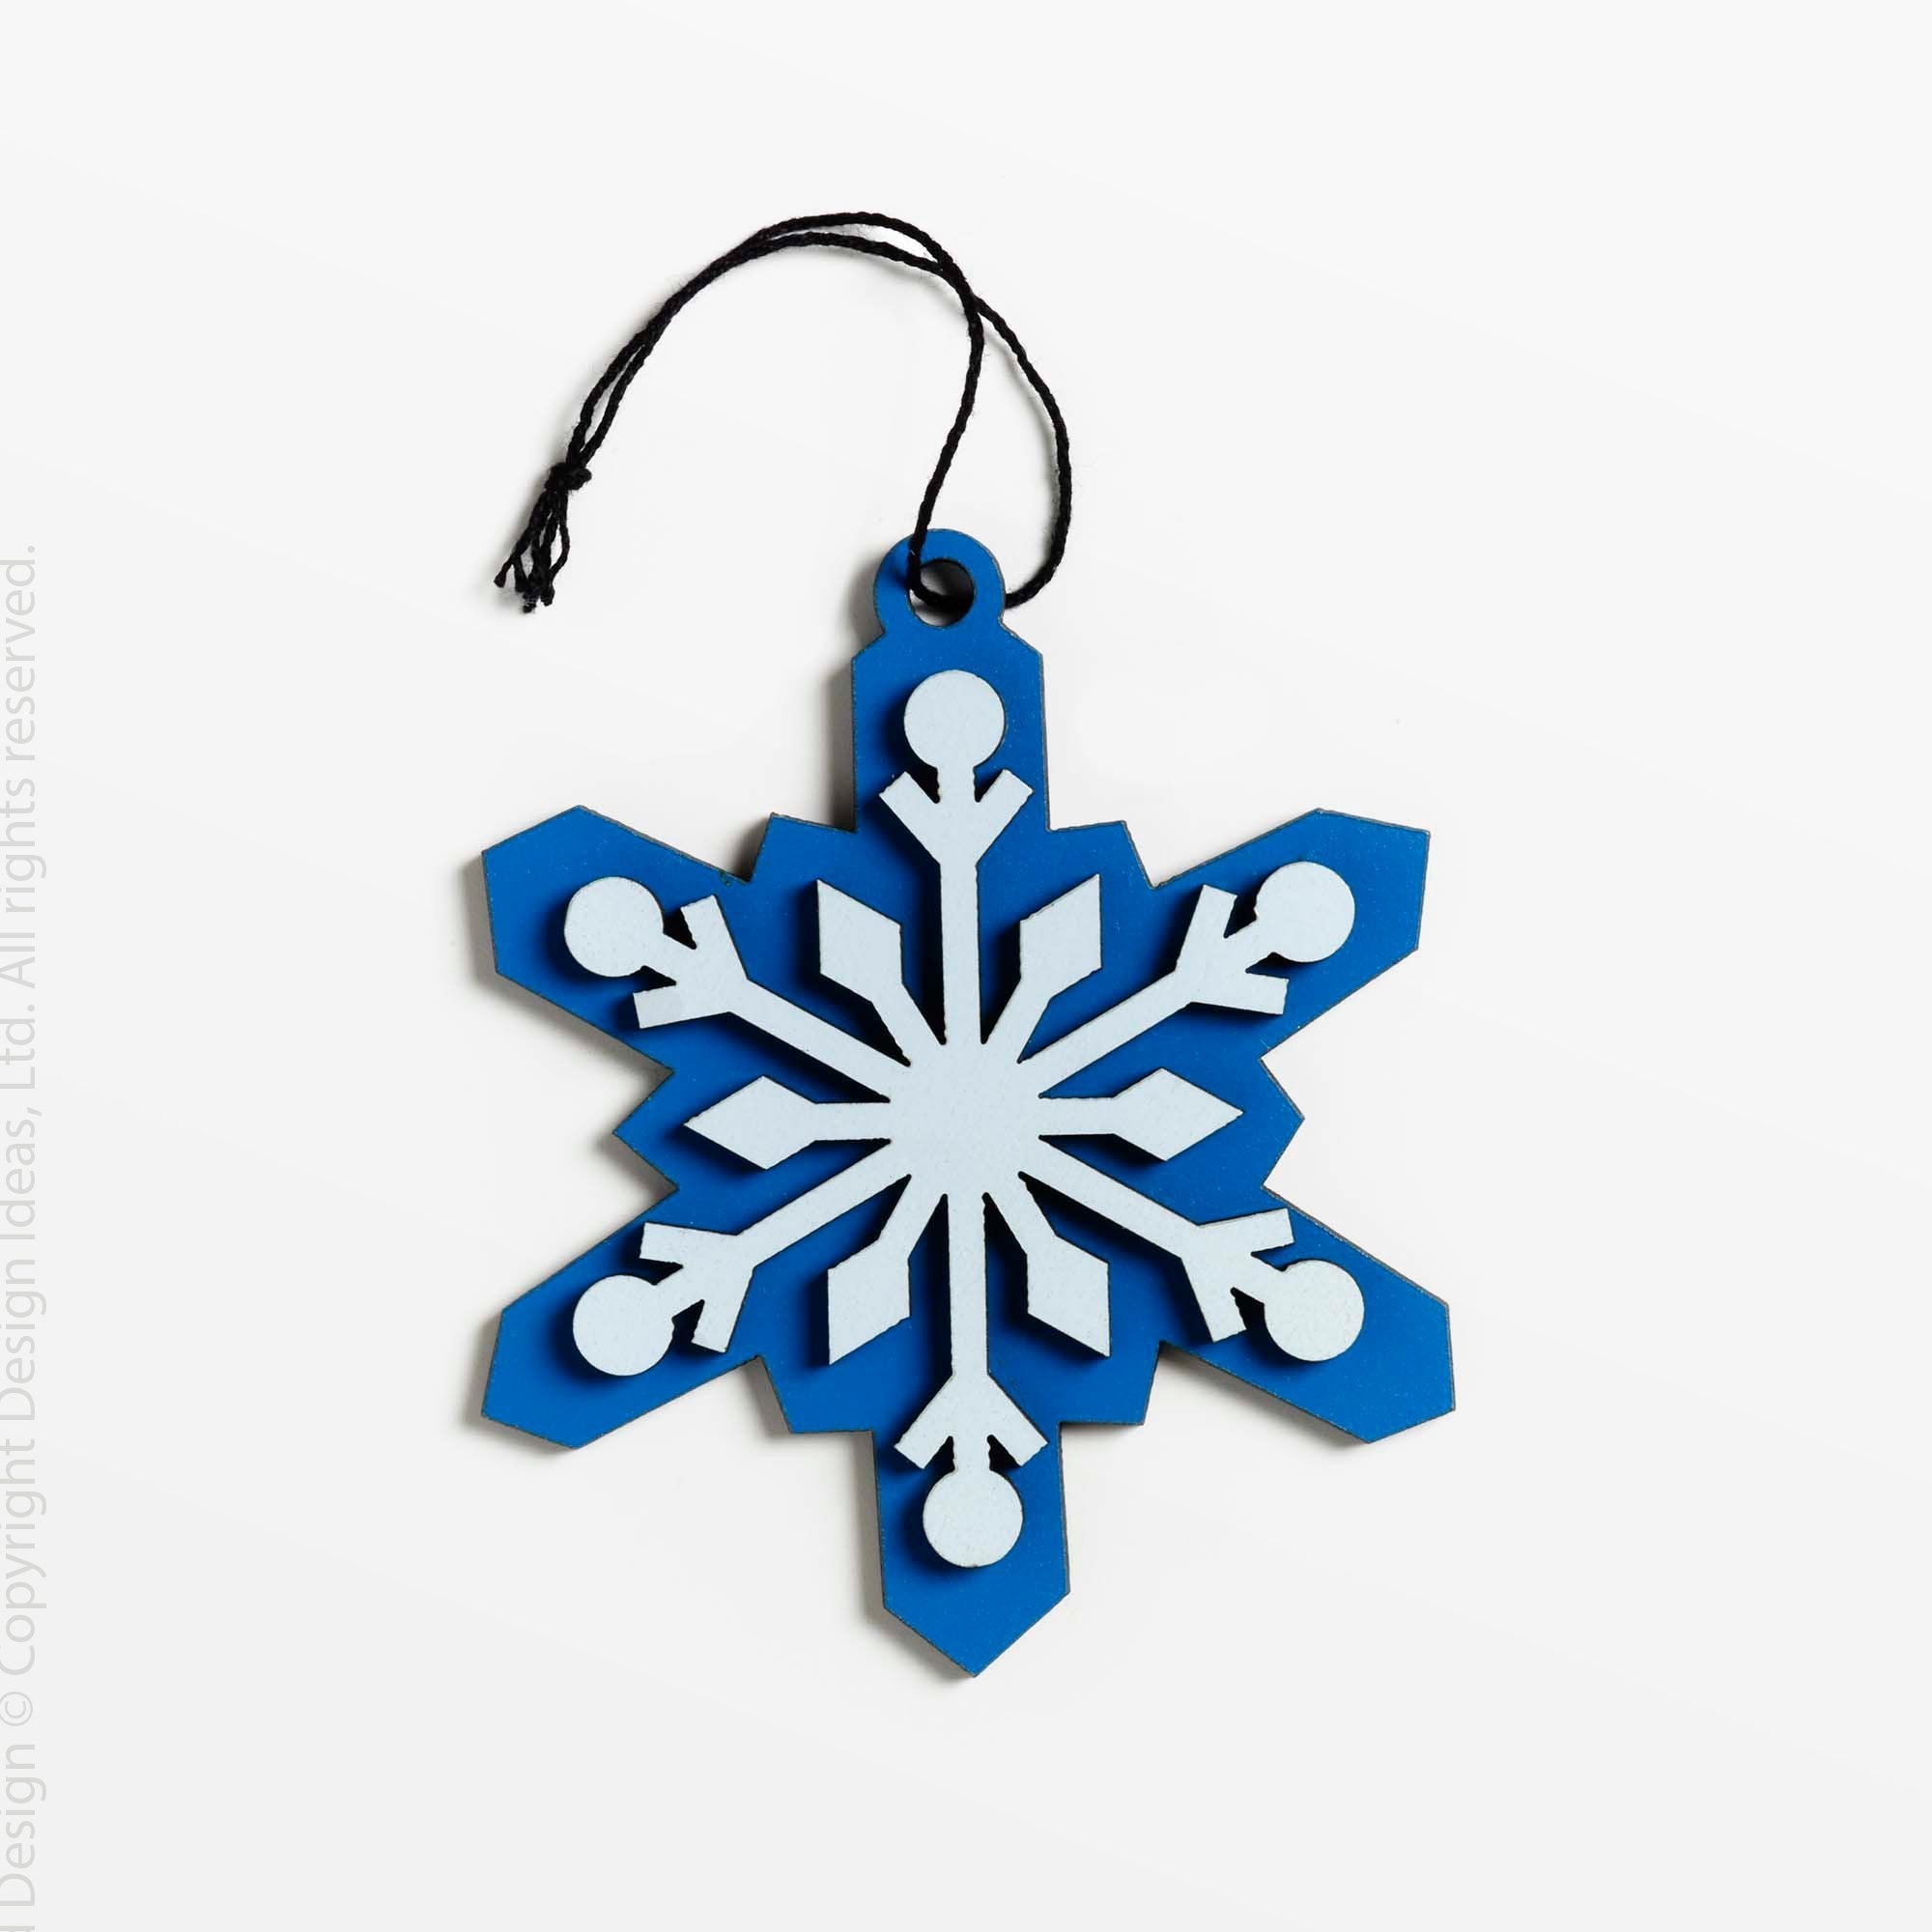 Hollyjolly Snowflake Wood Ornament - white color | Image 1 | From the HollyJolly Collection | Masterfully constructed with natural plywood for long lasting use | Available in white color | texxture home